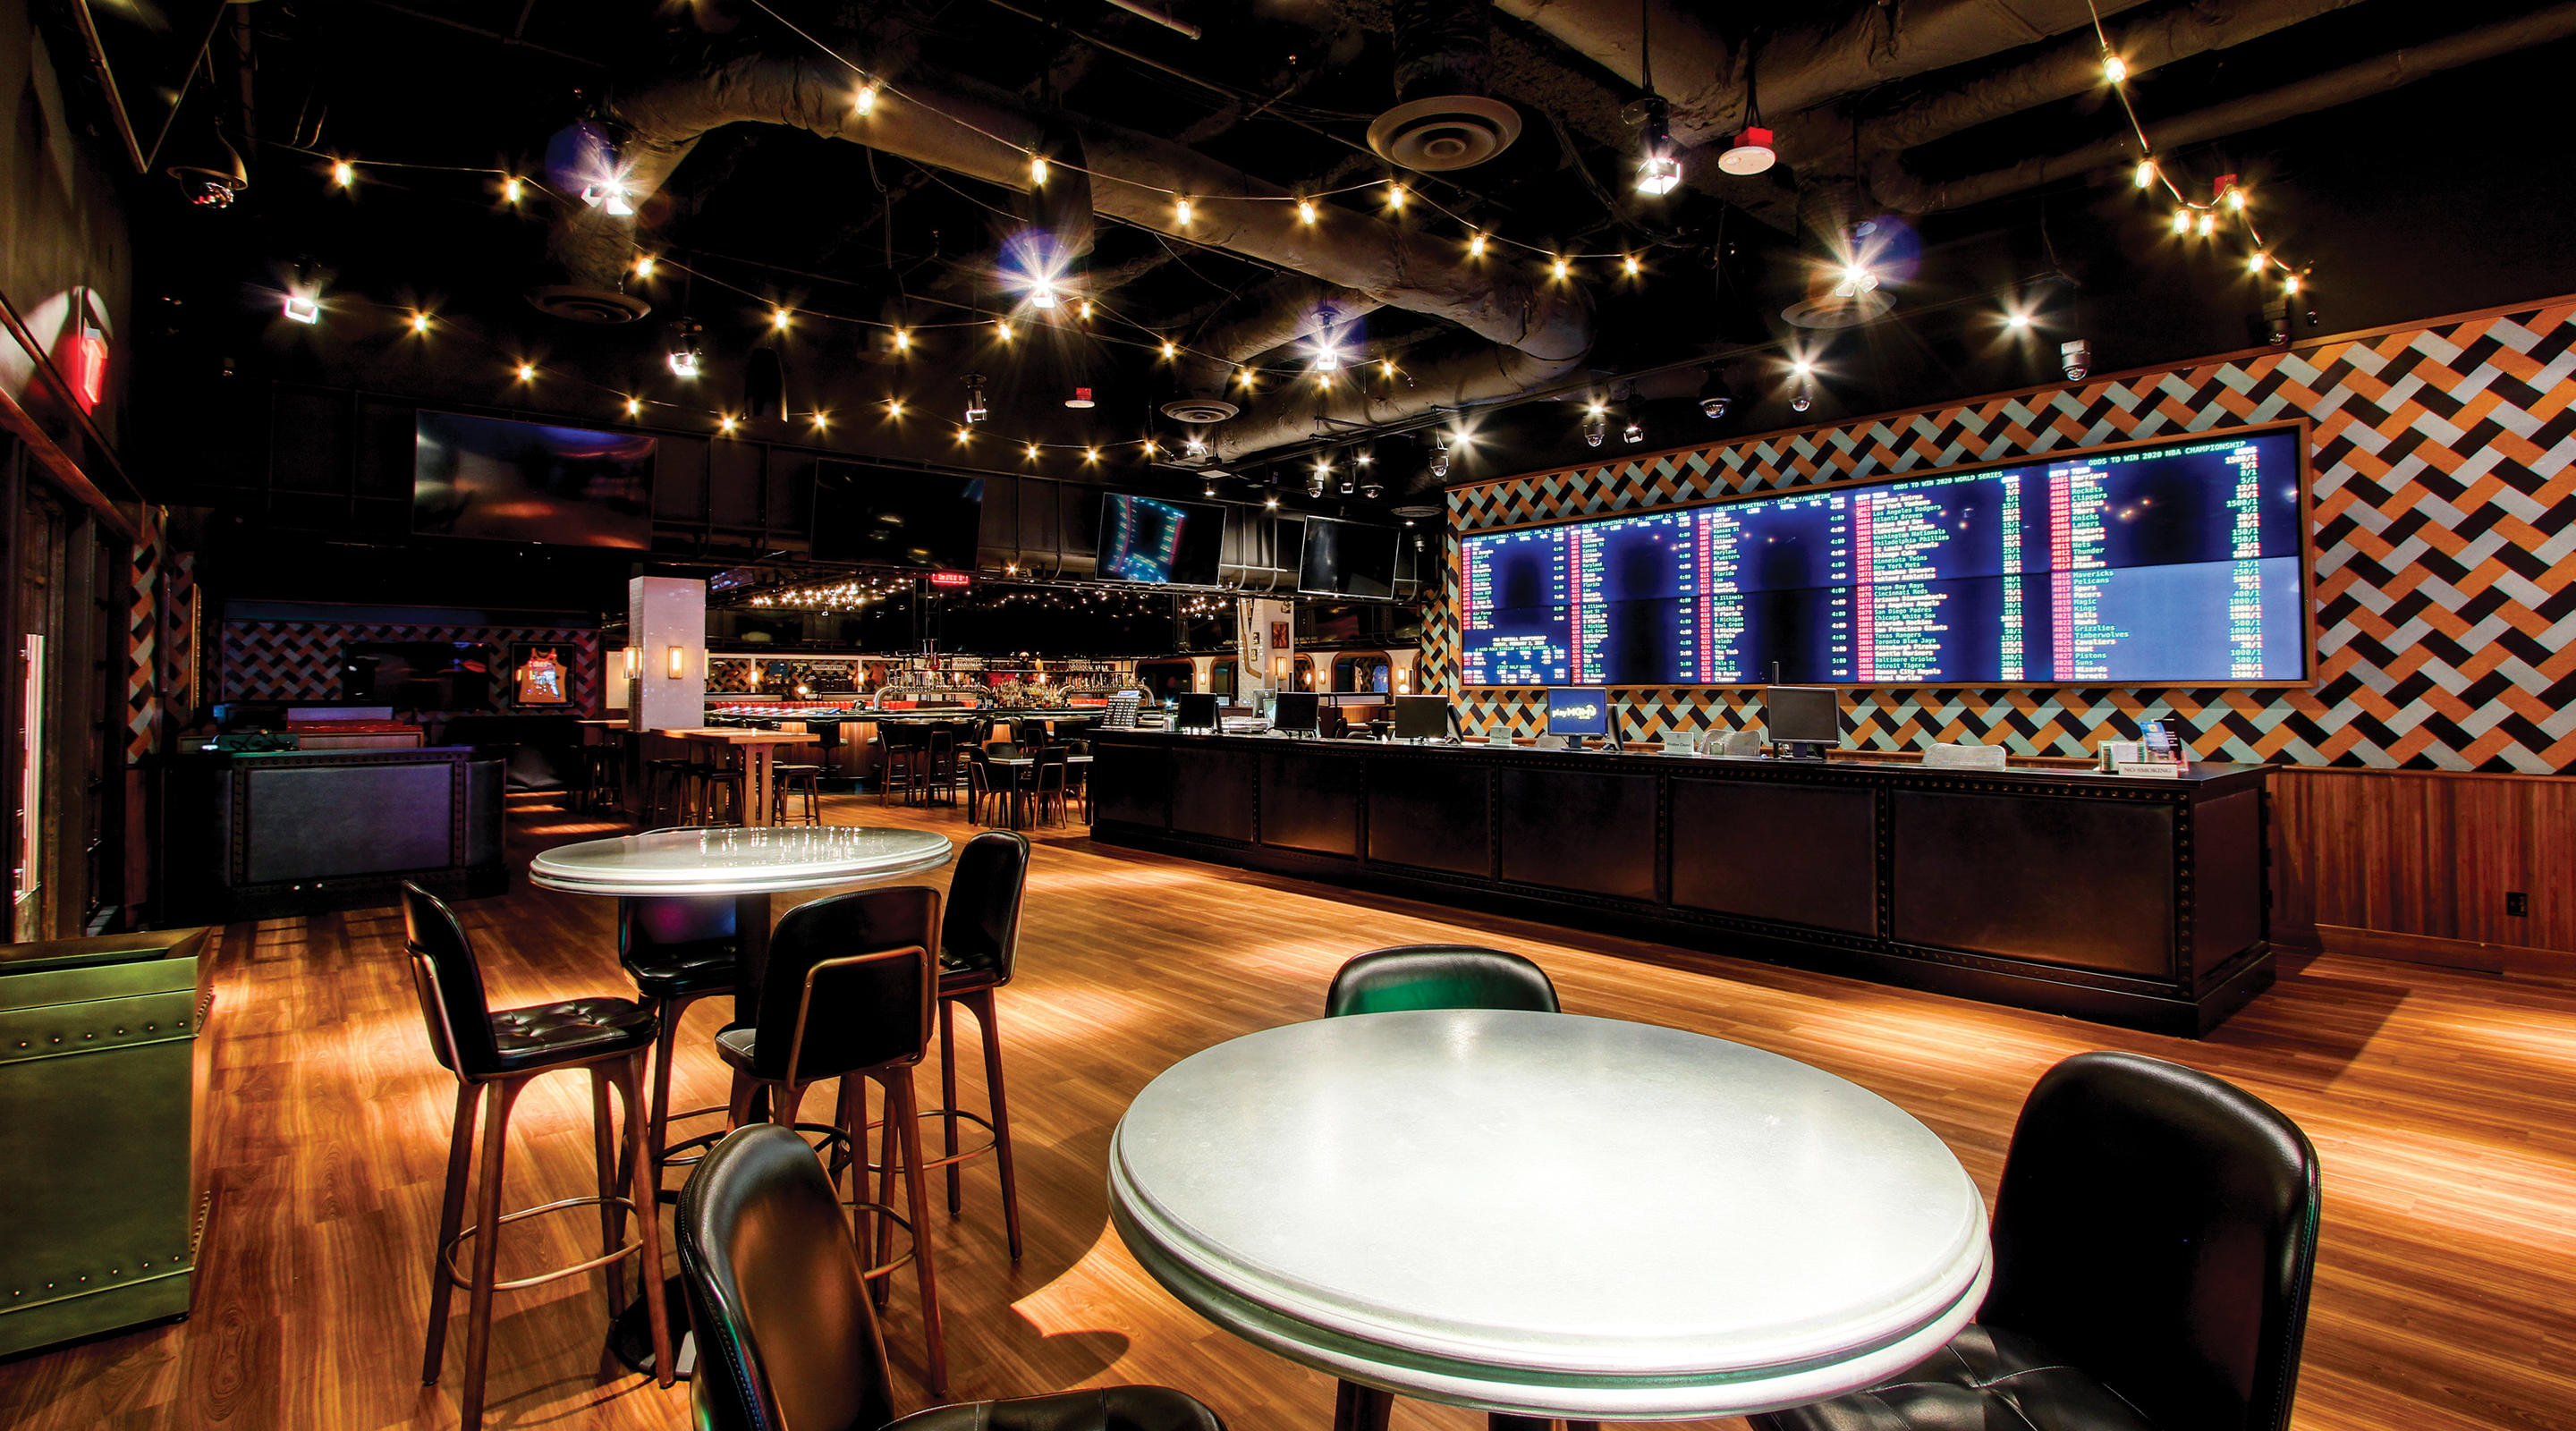 A view of the seating area in front of the main sportsbar area and betting display.